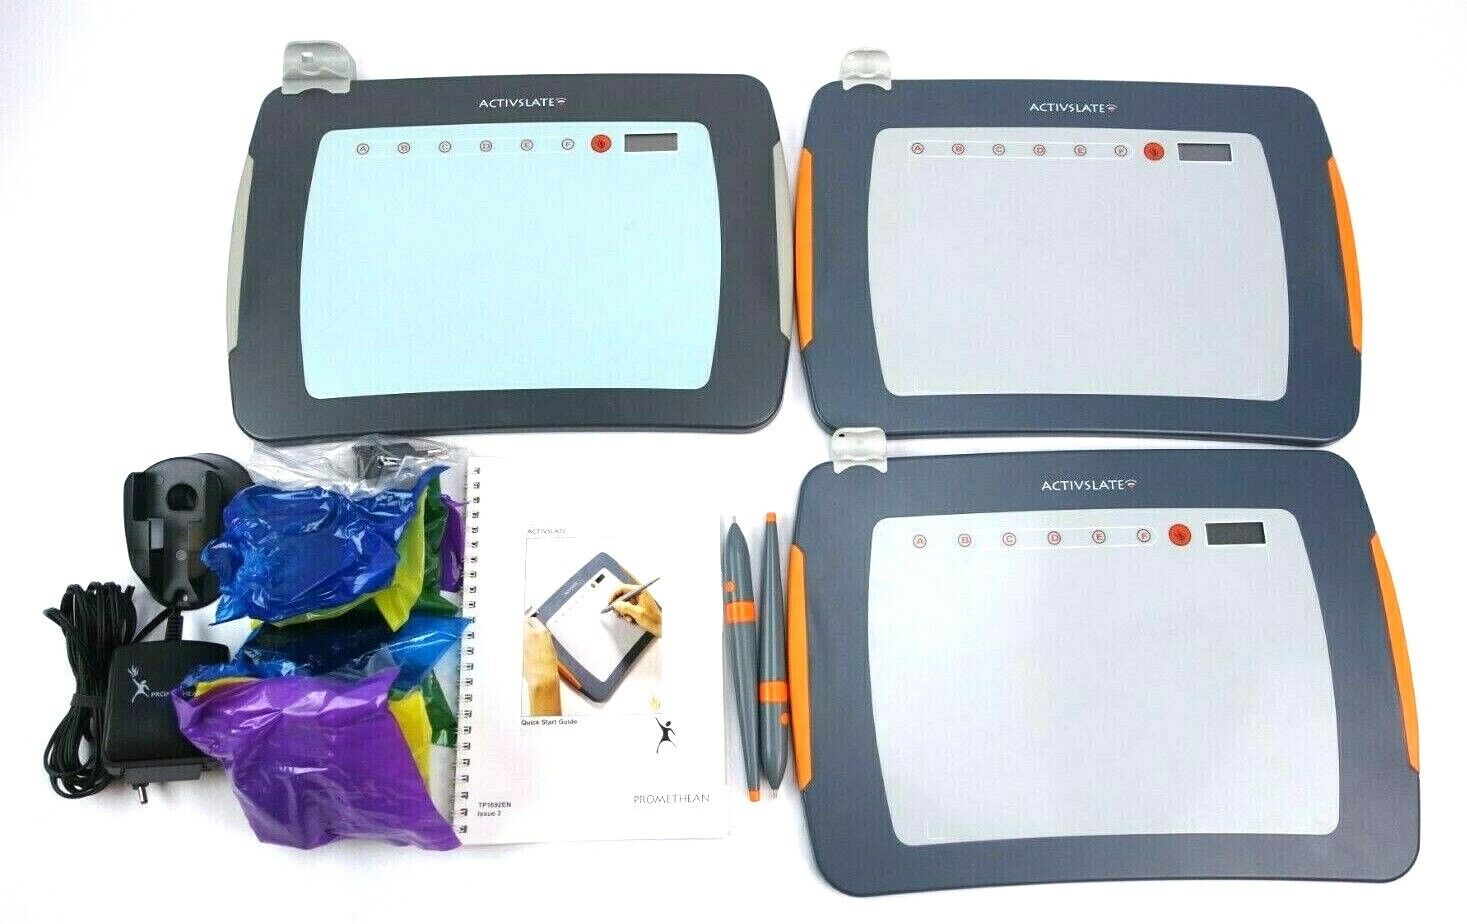 Promethean ActiveSlate PRM-RS2-02 / ActiveSlate50 w/ charger and pen